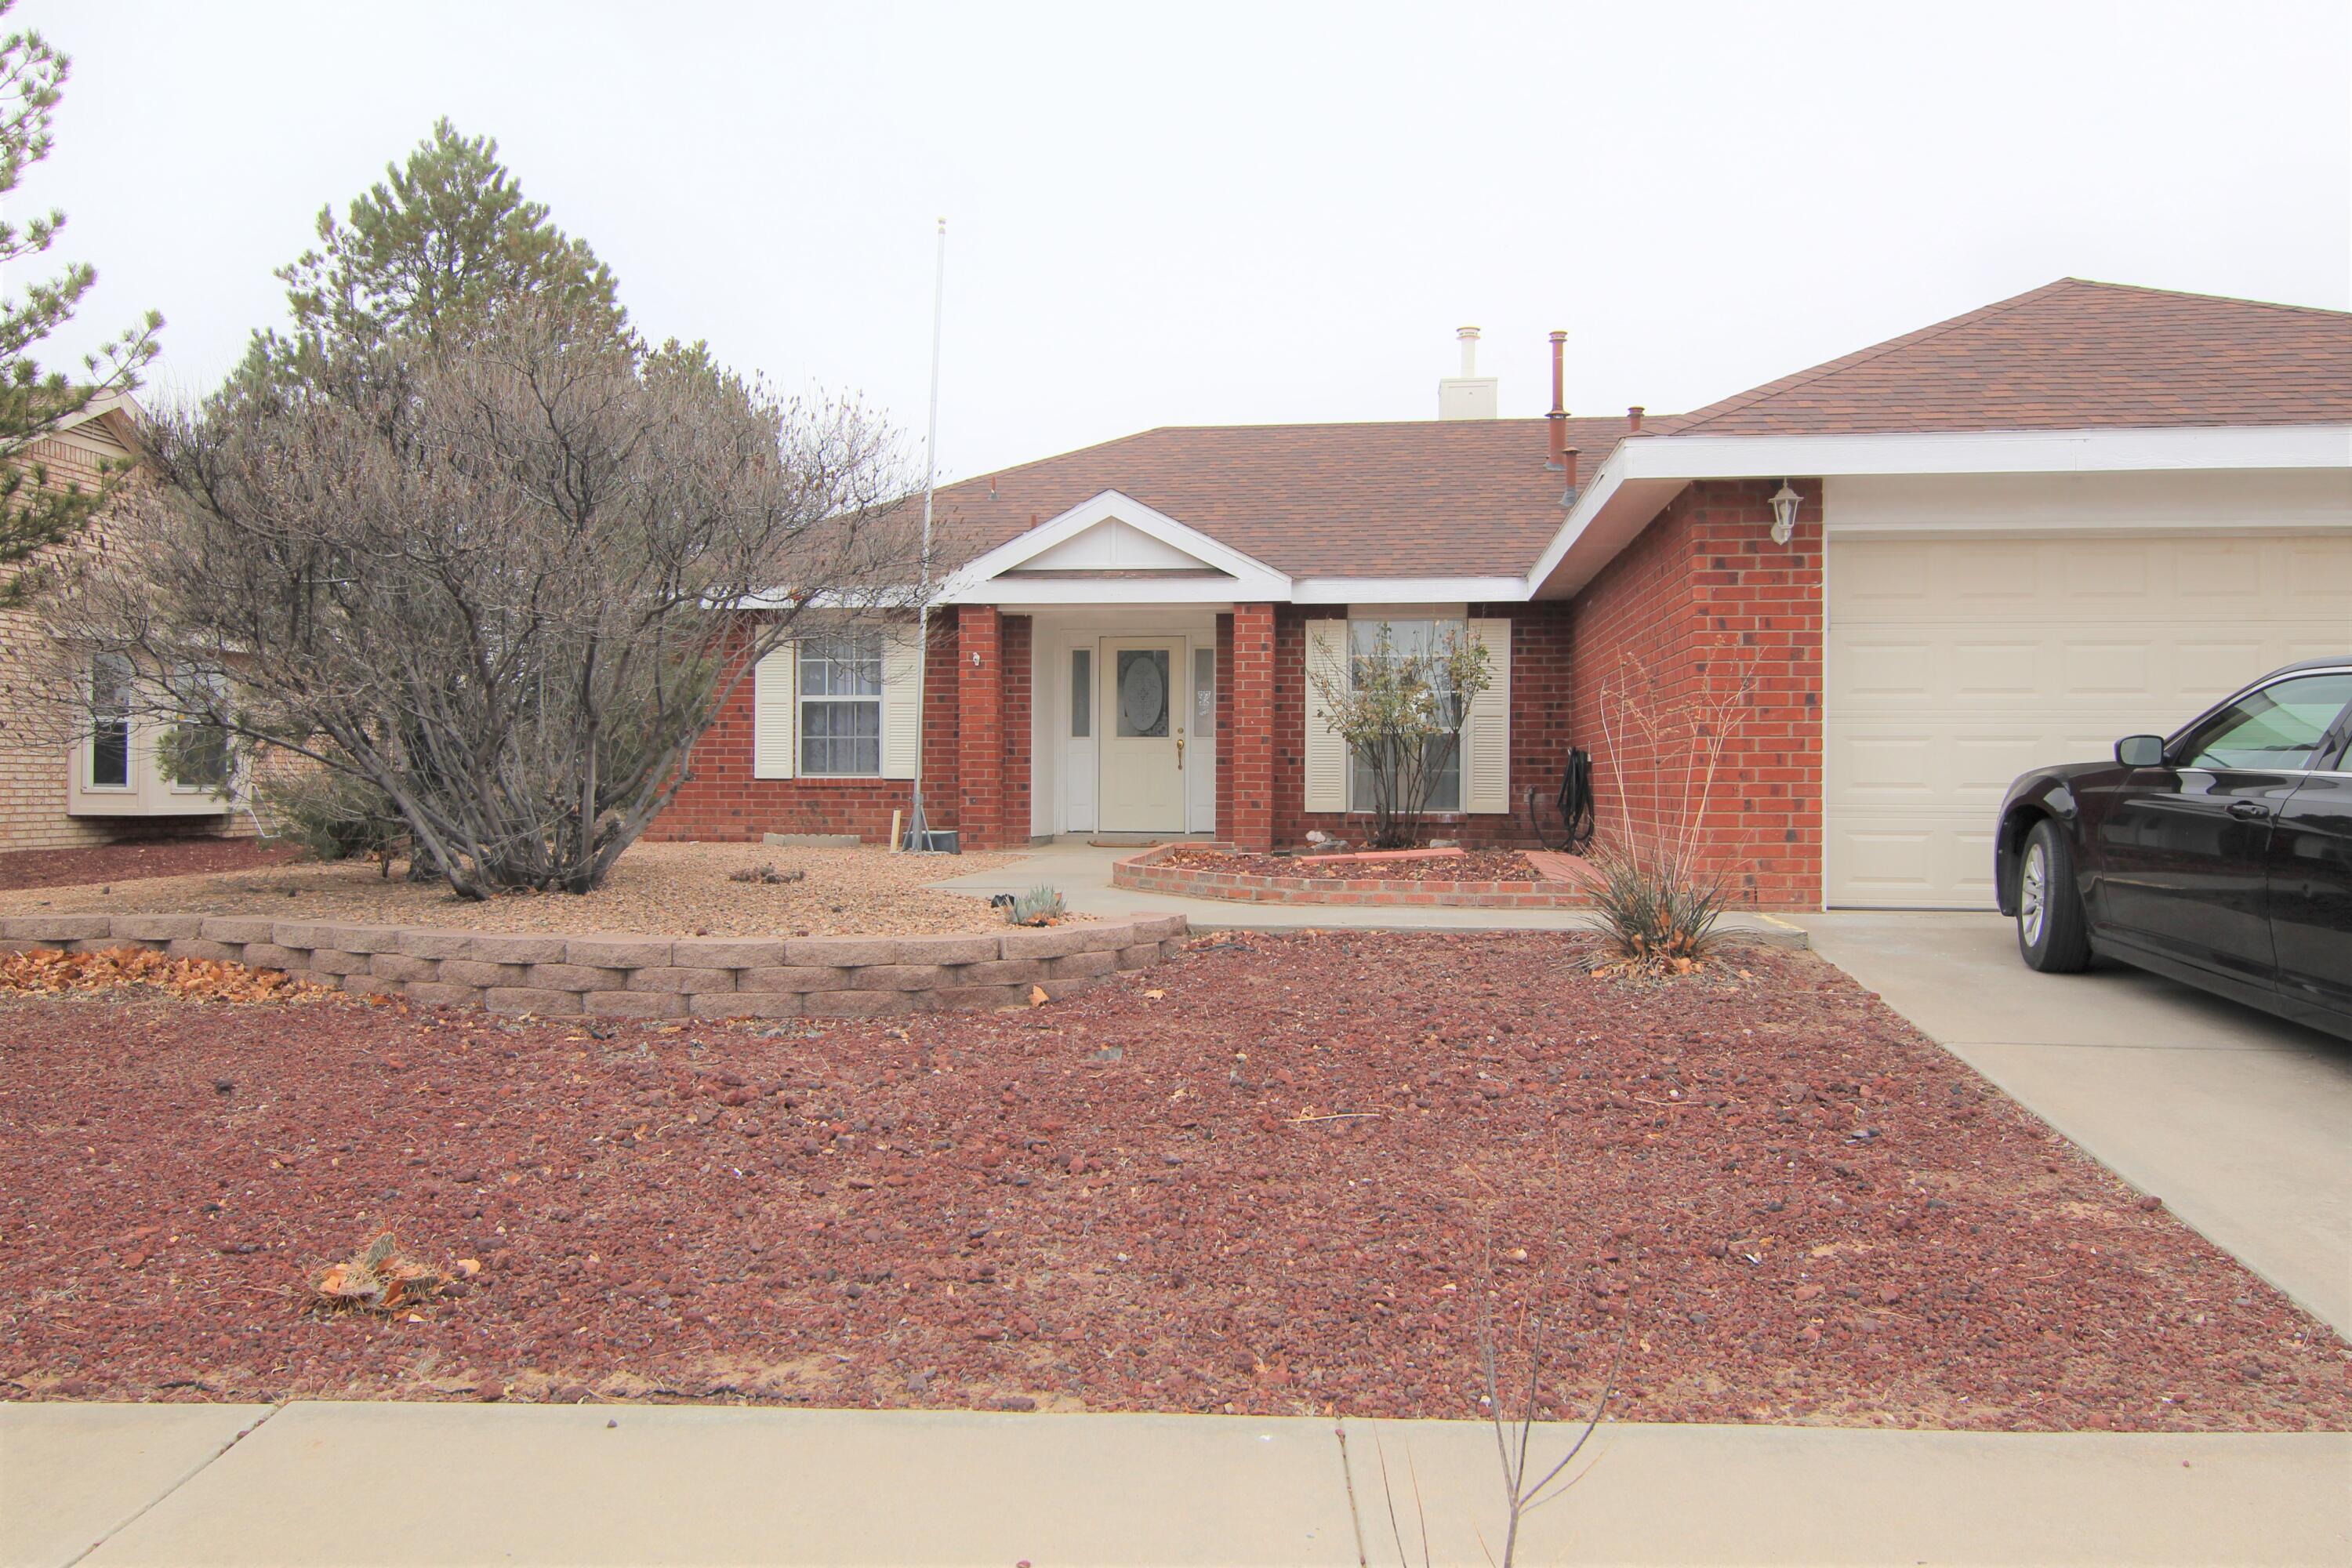 Don't miss this one!  Really nice Sivage Thomas home with easy-care brick veneer.  Can't beat the location; close to I-25 for commuting north or south; shopping, restaurants, theater; shools including UNM Valencia campus.  Newer roof, refrigerated air, water heater, fresh paint, some new flooring and new microwave.  The open floor plan is great for entertaining family and friends.  Enjoy your morning coffee or sit and relax after a long day on the back patio.  The walled back yard keeps the kiddos and pets safe.  Plus, there is a park nearby for the kiddos, grandkiddos and dogs to romp and play.